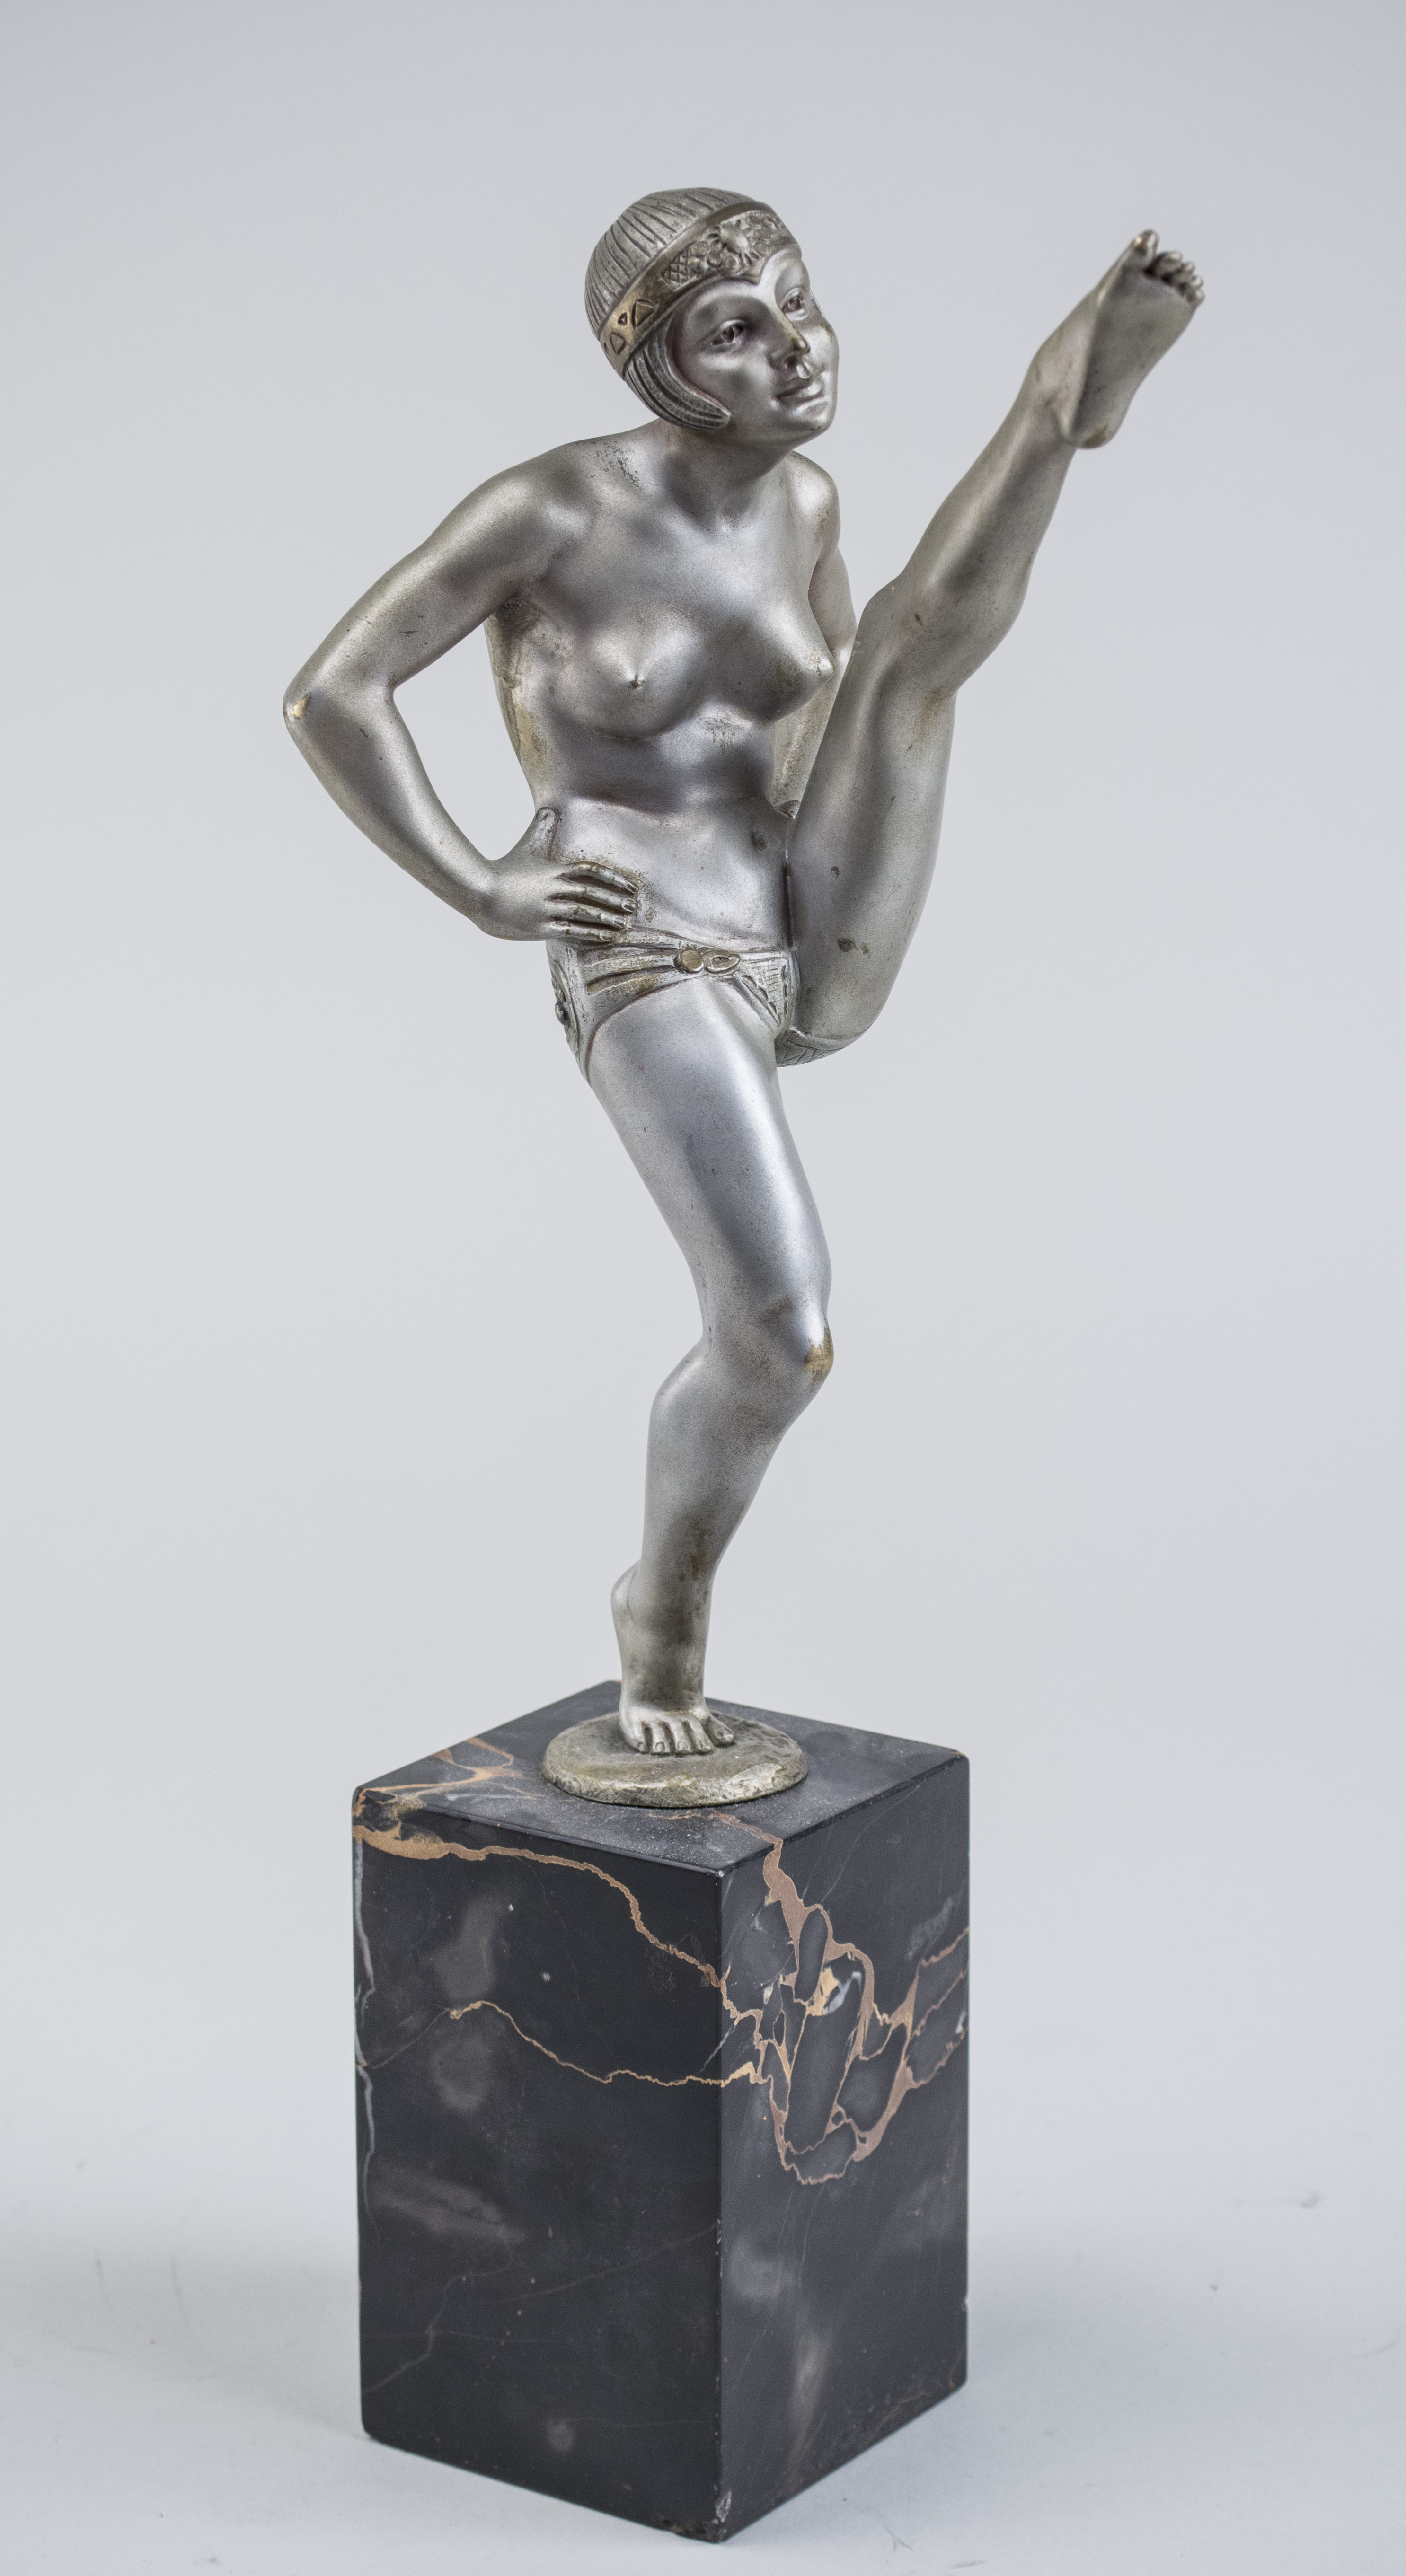 French Art Deco school (20th century) 'Flapper Girl' patinated bronze on marble base. Estimate $1,500-$2,000. Capo Auction image